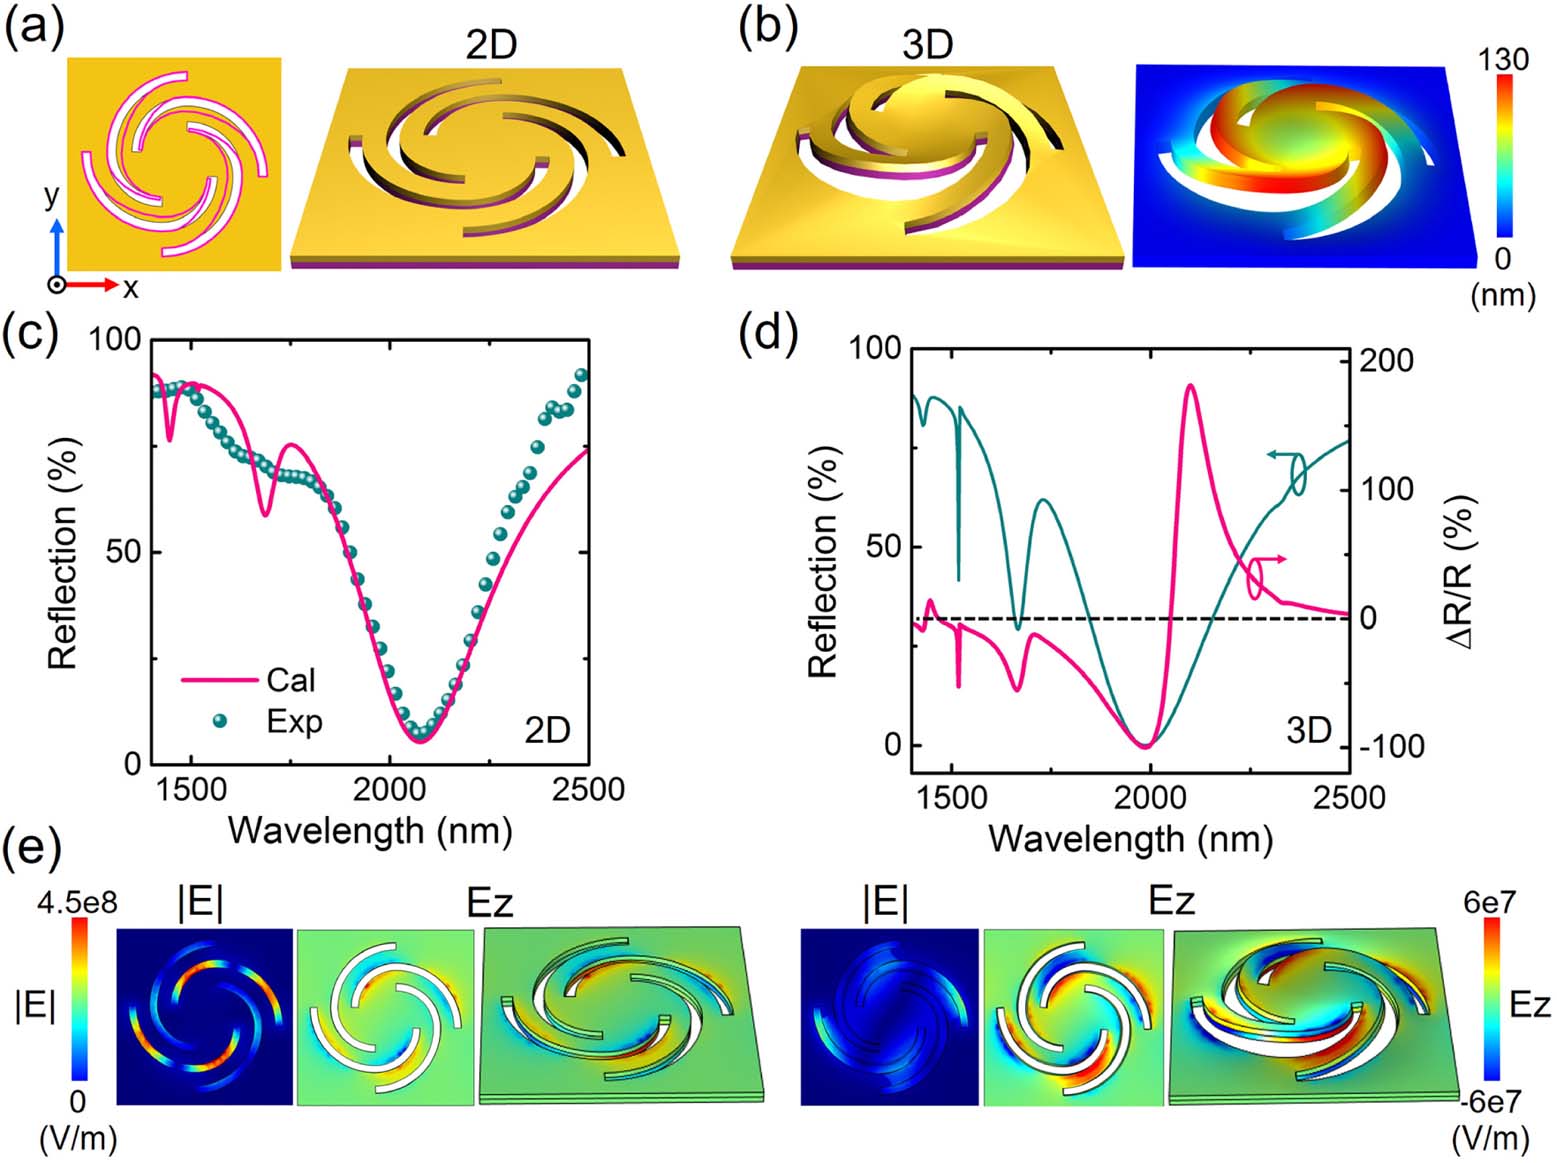 (a) Schematics of the spiral unit cell and (b) the simulated 3D deformed counterpart with a deformation height of 130 nm. The violet lines in the left-side image of (a) denote the top-view outlines of the deformed spirals in (b). The right-side image of (b) shows the degree of the vertical deformation. Each spiral contains two 90° arcs with radii of 350 and 525 nm, respectively. (c) Calculated (Cal) and experimental (Exp) reflection spectra of the 2D porous metasurface. (d) (left) Calculated reflection spectrum of the deformed metasurface under a vertical deformation of 130 nm and (right) corresponding modification contrast in reflection (ΔR/R) versus wavelength. The reflection spectral dip shifts from 2076 to 1986 nm with a dramatic modification of 181% at wavelength 2100 nm. (e) Top-view and side-view simulated (left) E-field distributions (|E|) and (right) their vertical component (Ez) for the 2D and 3D spirals at wavelength 2076 nm. The left and right scale bars correspond to the field of |E| and Ez, respectively.